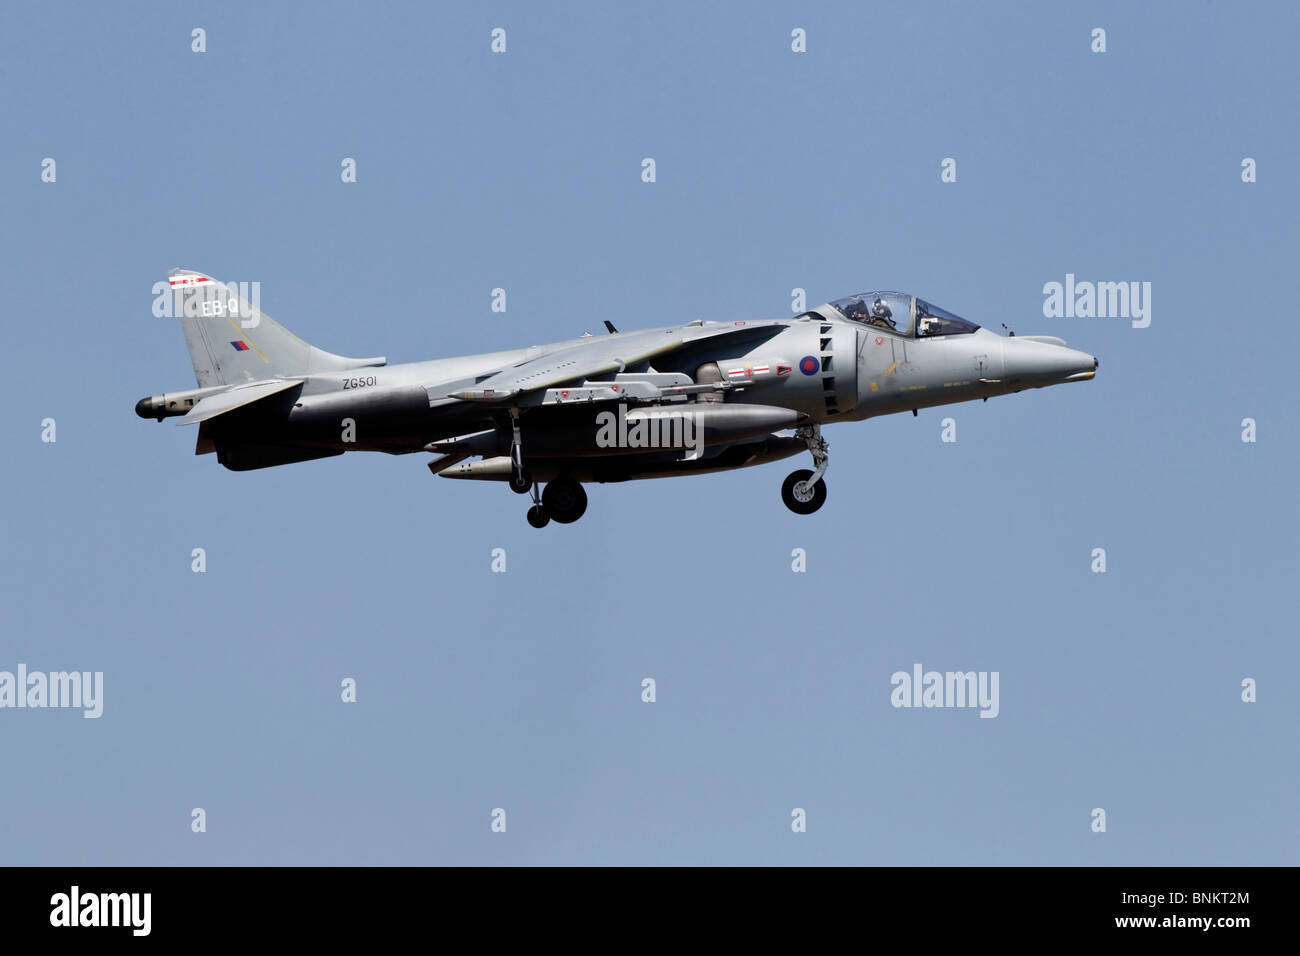 A Bae systems Harrier ground attack and strike aircraft of the RAF Stock Photo